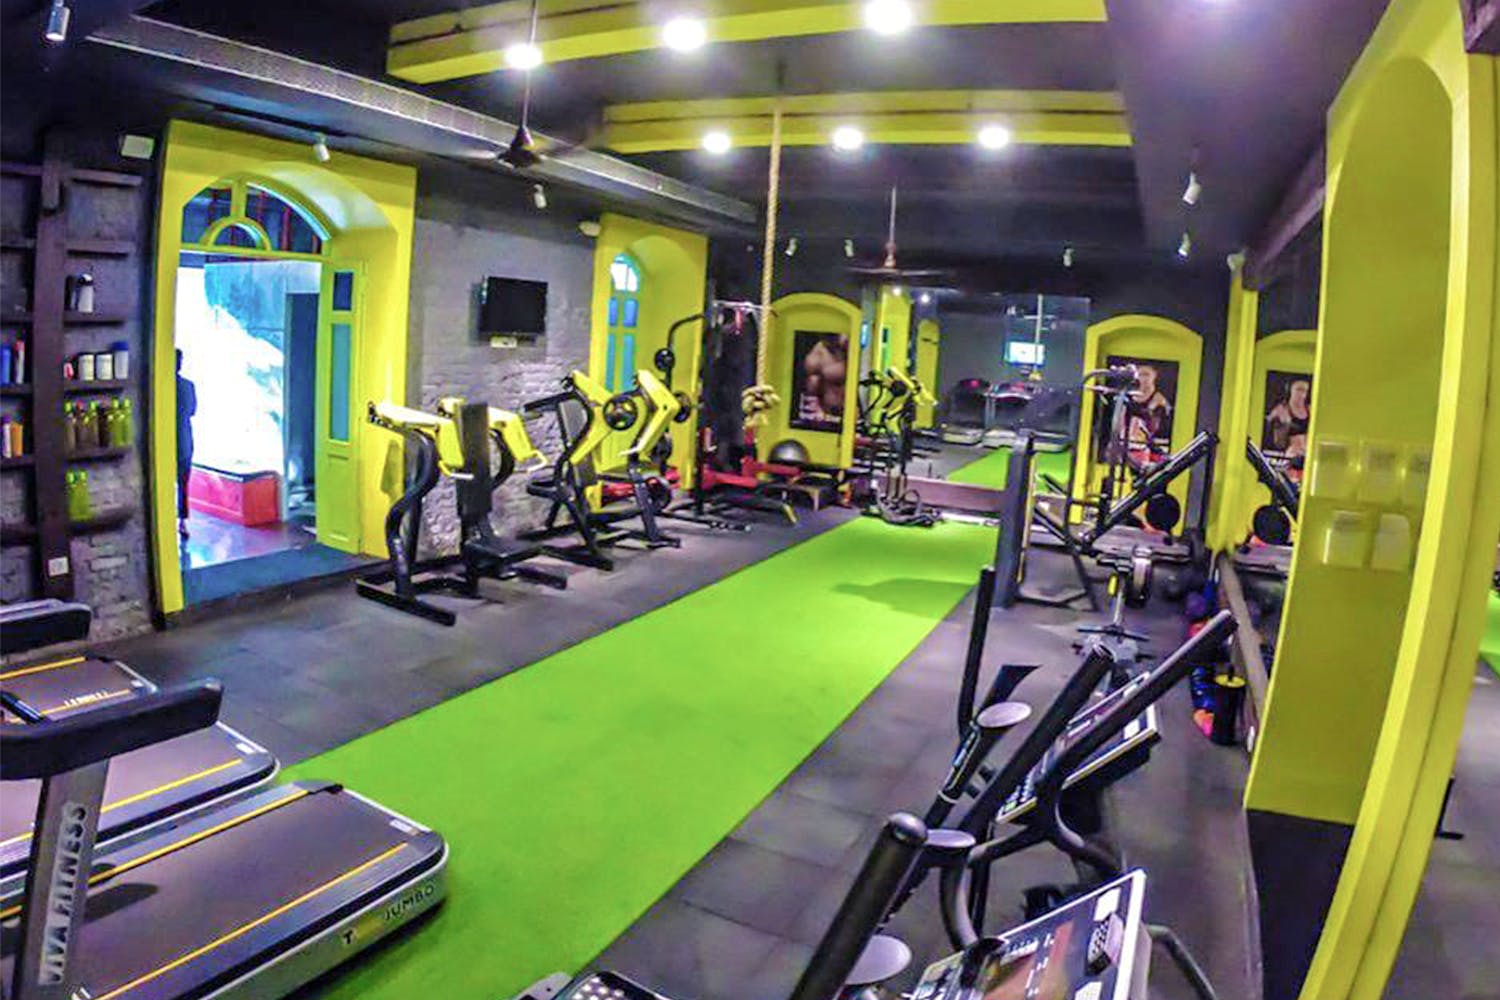 Gym,Room,Sport venue,Physical fitness,Crossfit,Leisure,Exercise equipment,Leisure centre,Exercise,Sports training